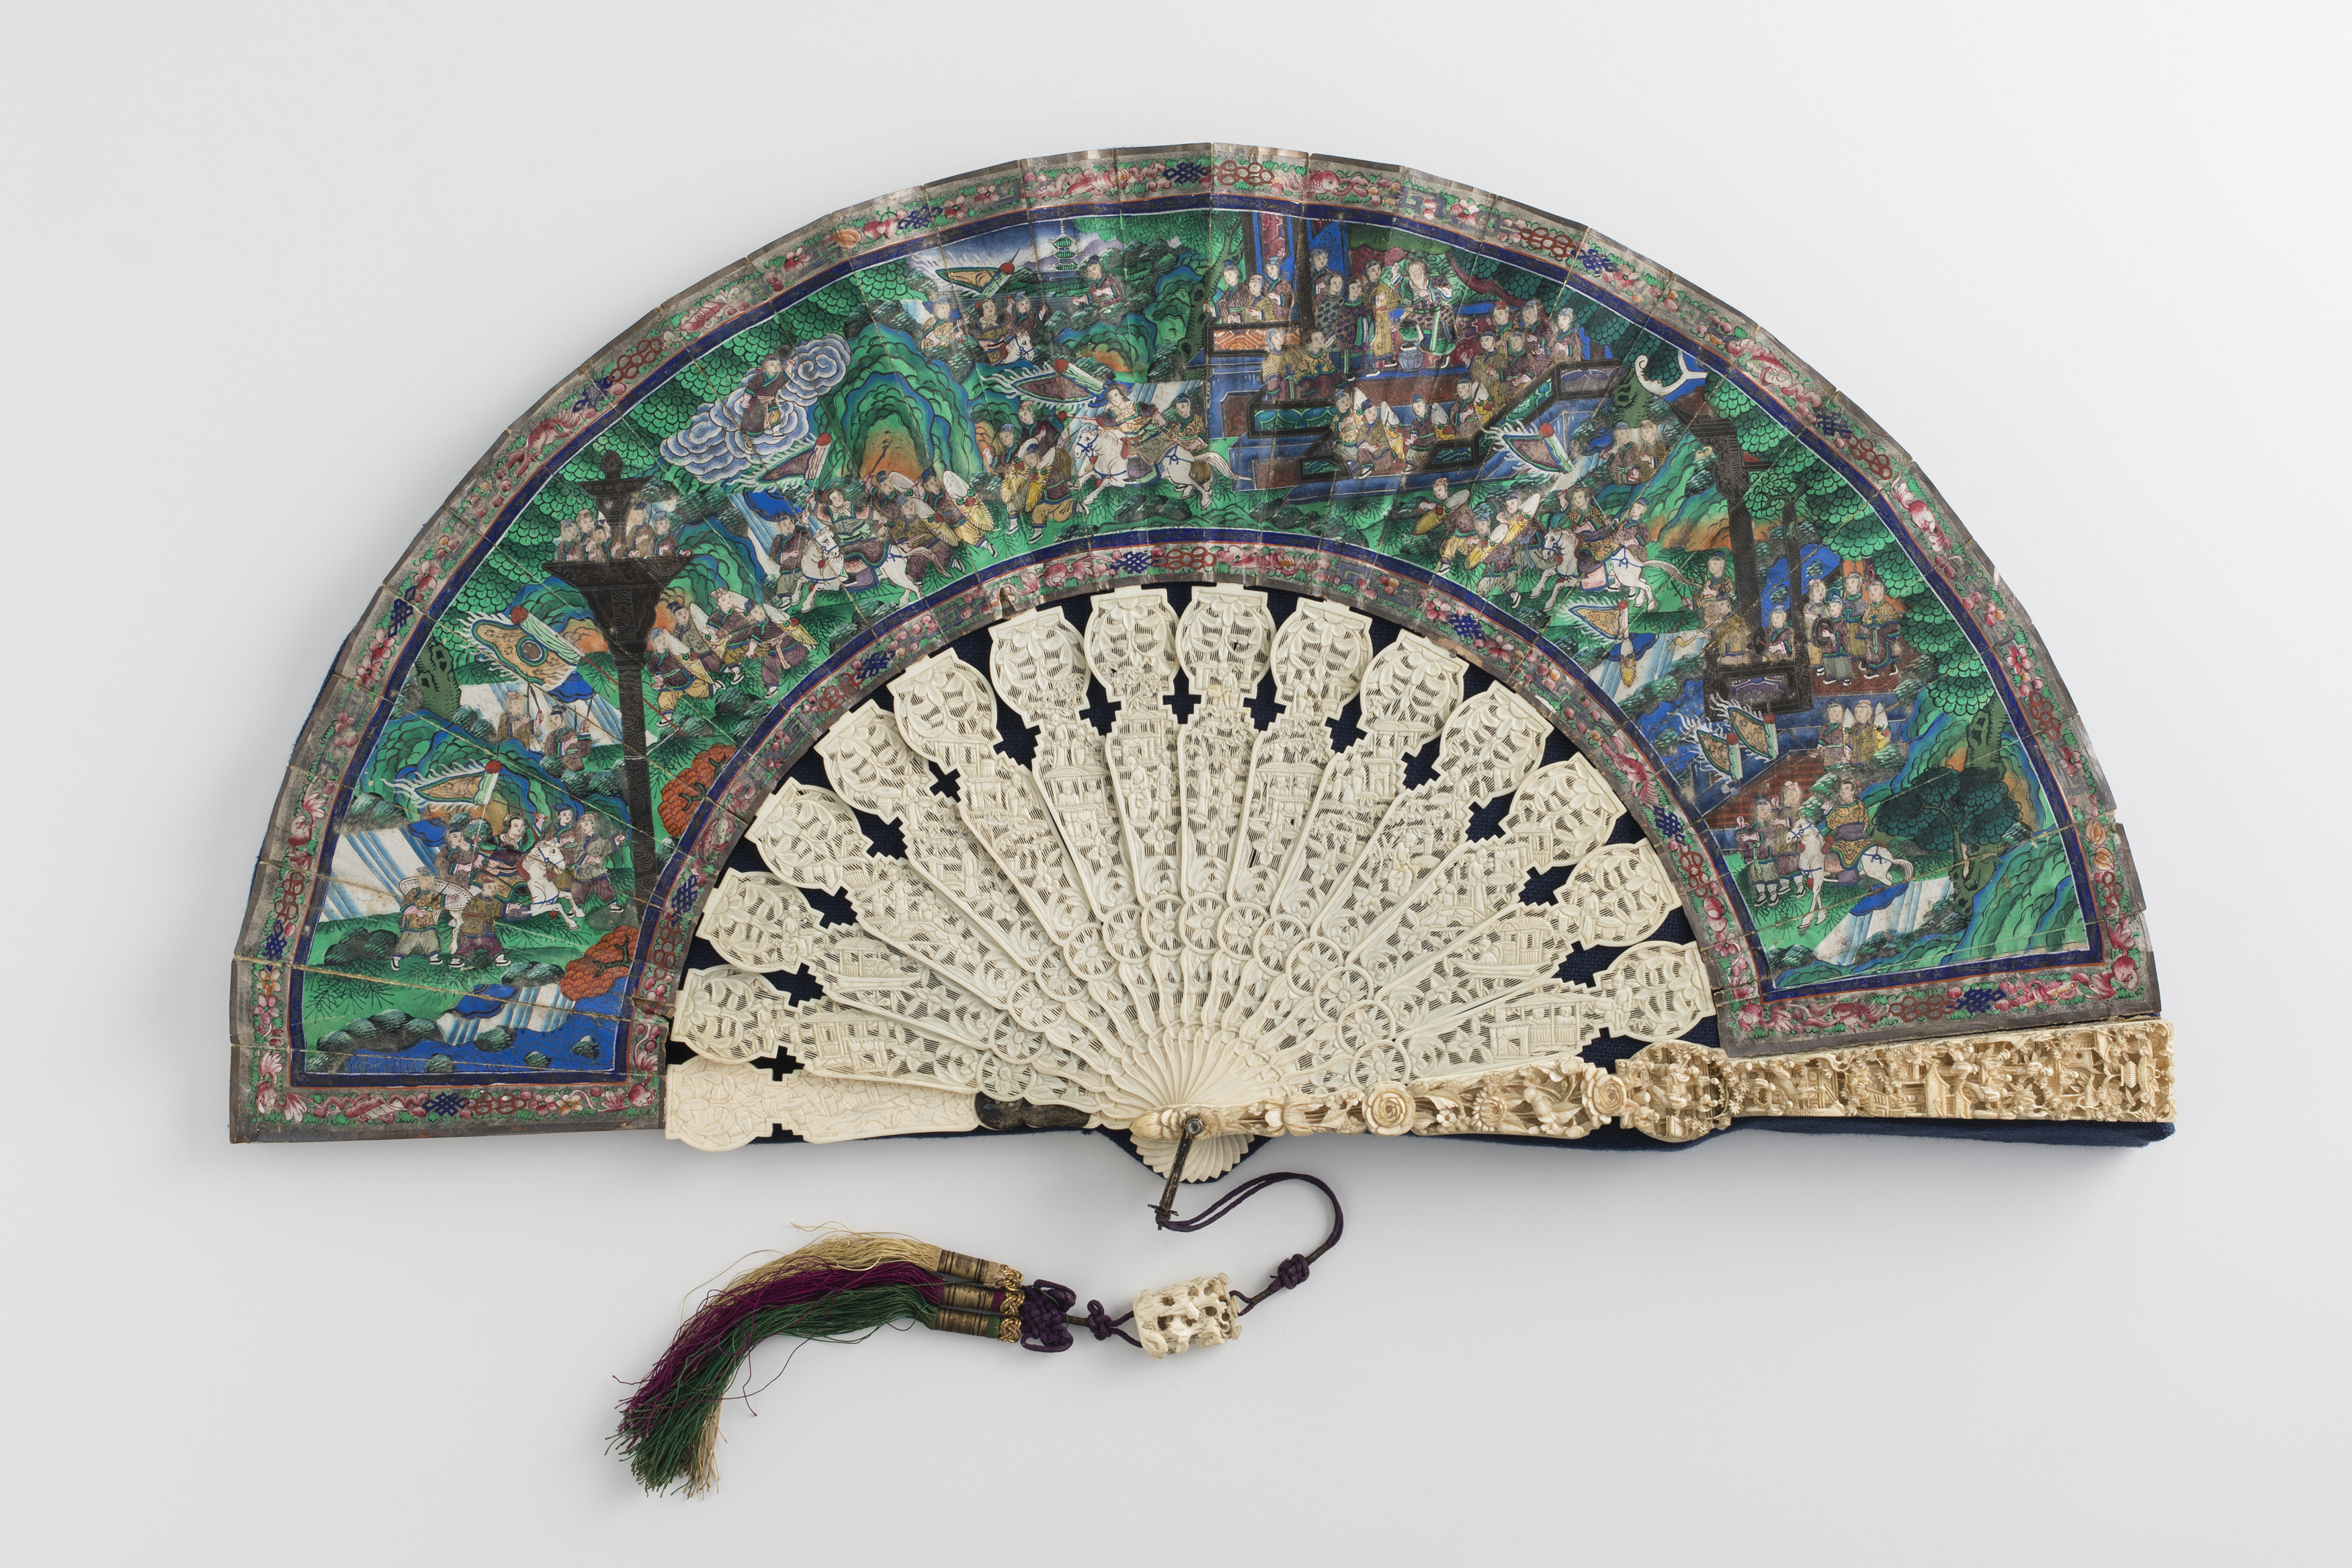 Chinese folding fan open on a grey background. The blades are intricately carved ivory and the painted paper surface (leaves) portrays a busy landscape, depicting what looks like a historic scene with many small brightly coloured figures.